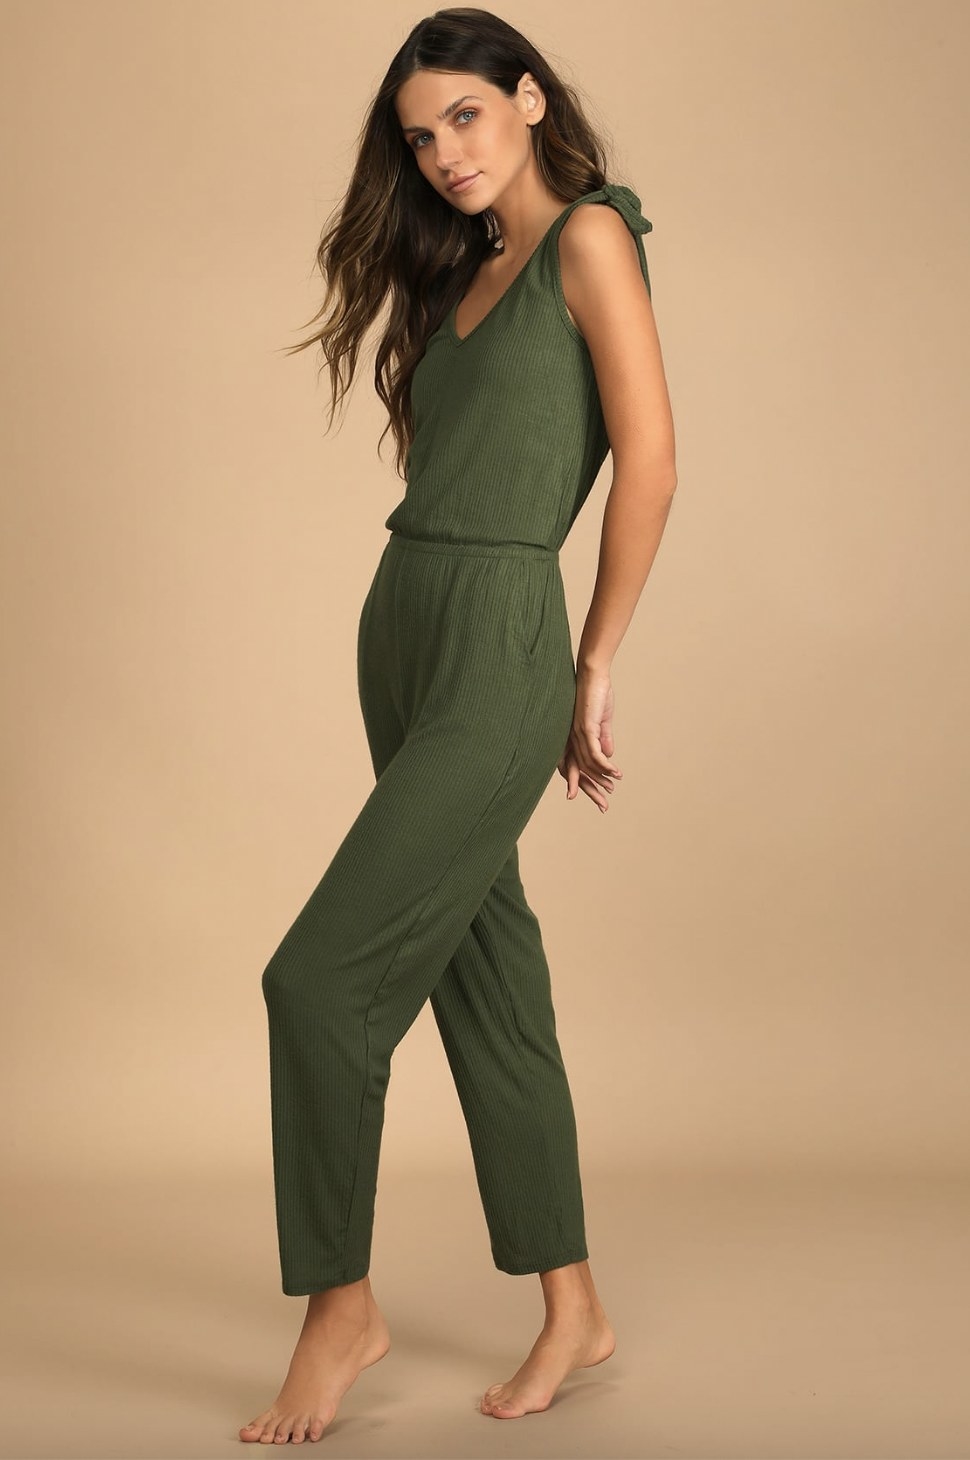 A model wearing the jumpsuit in olive green